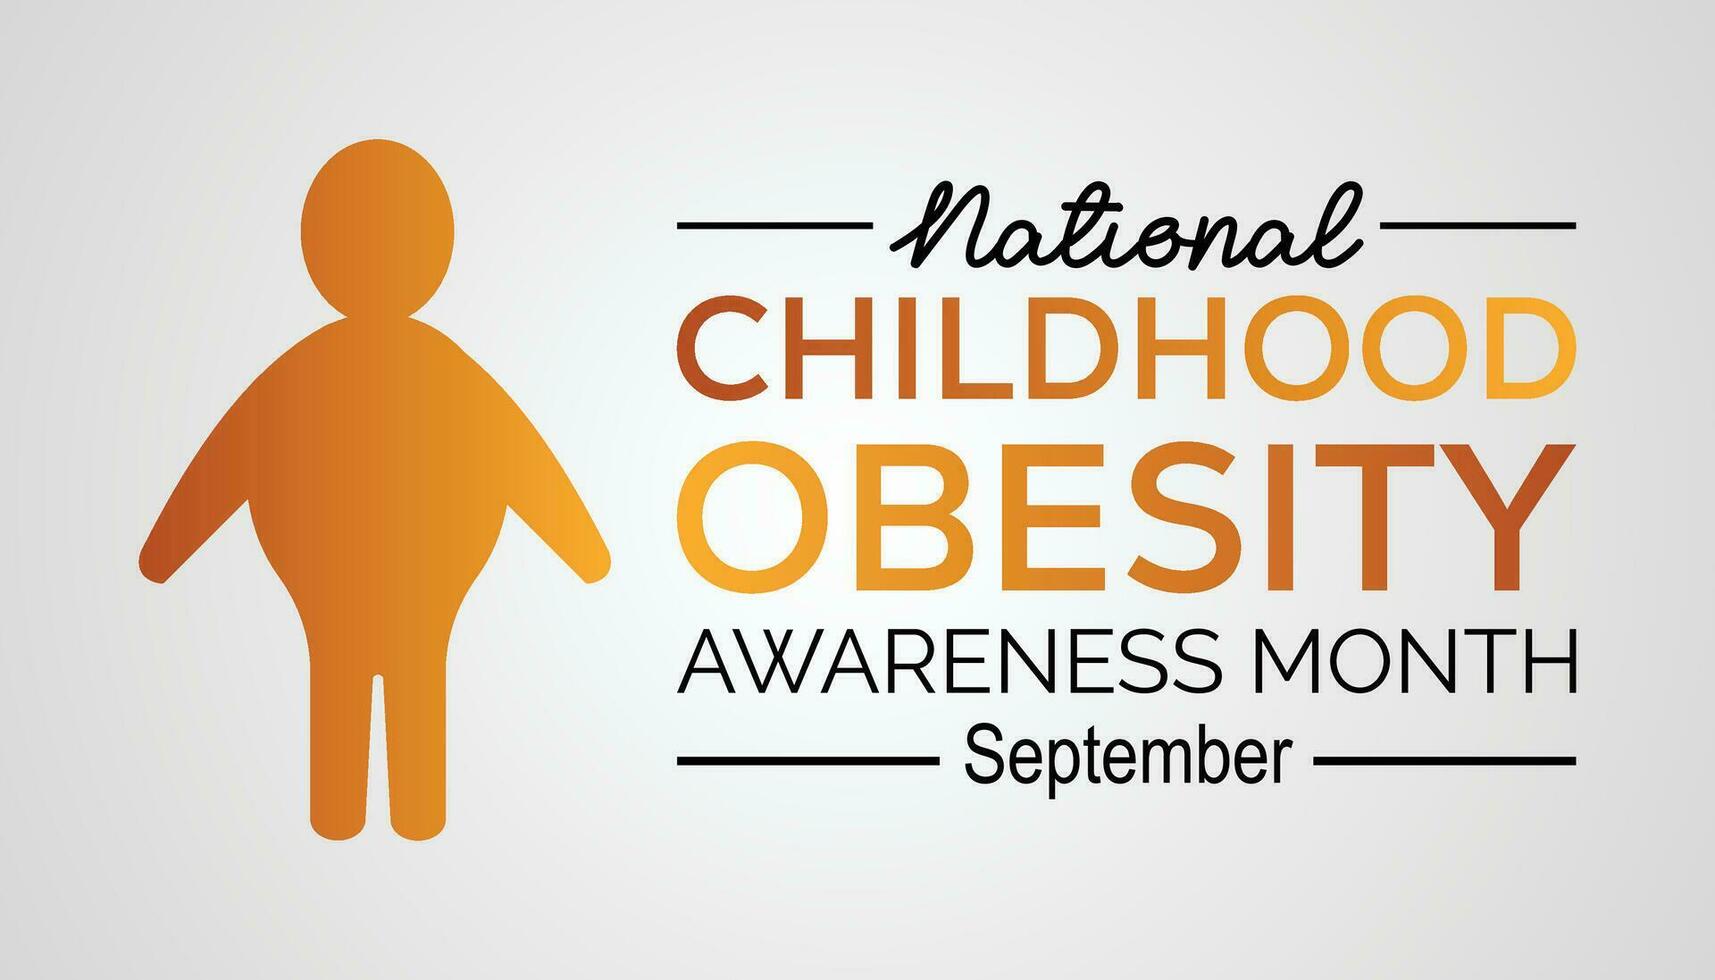 childhood obesity awareness month observed each year during September . Vector illustration on the theme of .